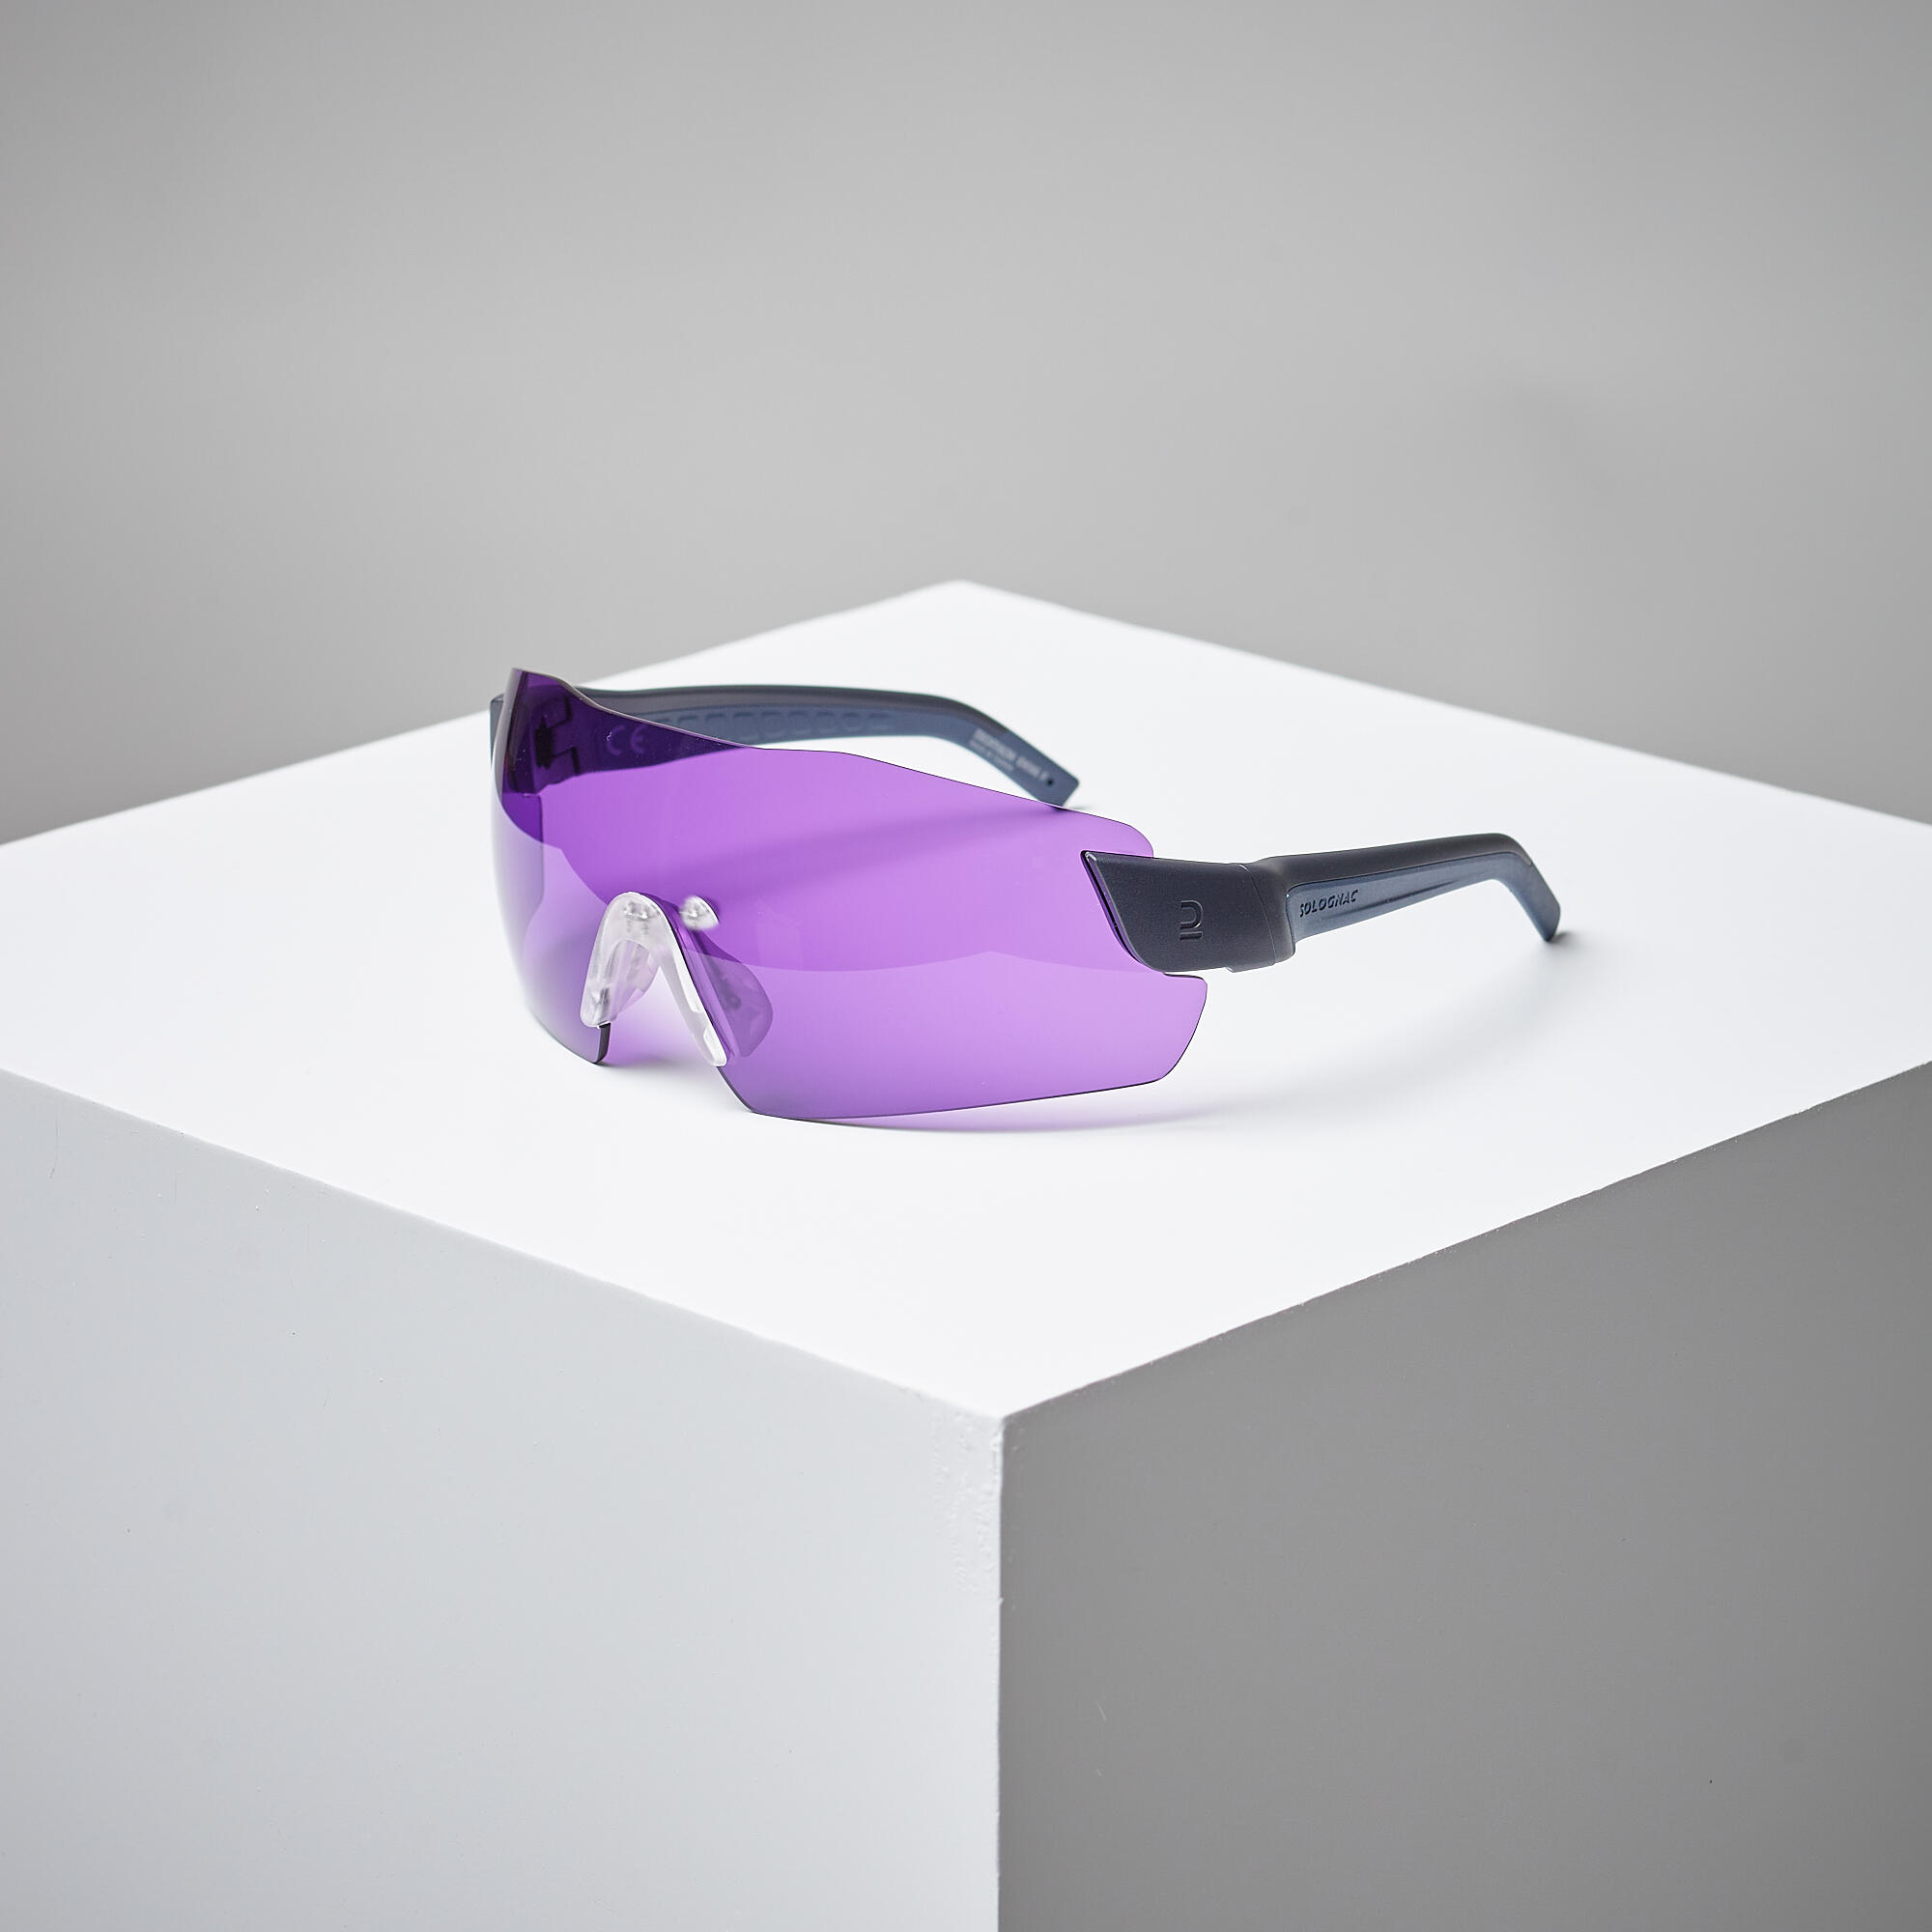 SAFETY GLASSES FOR CLAY PIGEON SHOOTING 500 PURPLE CATEGORY 3 1/6